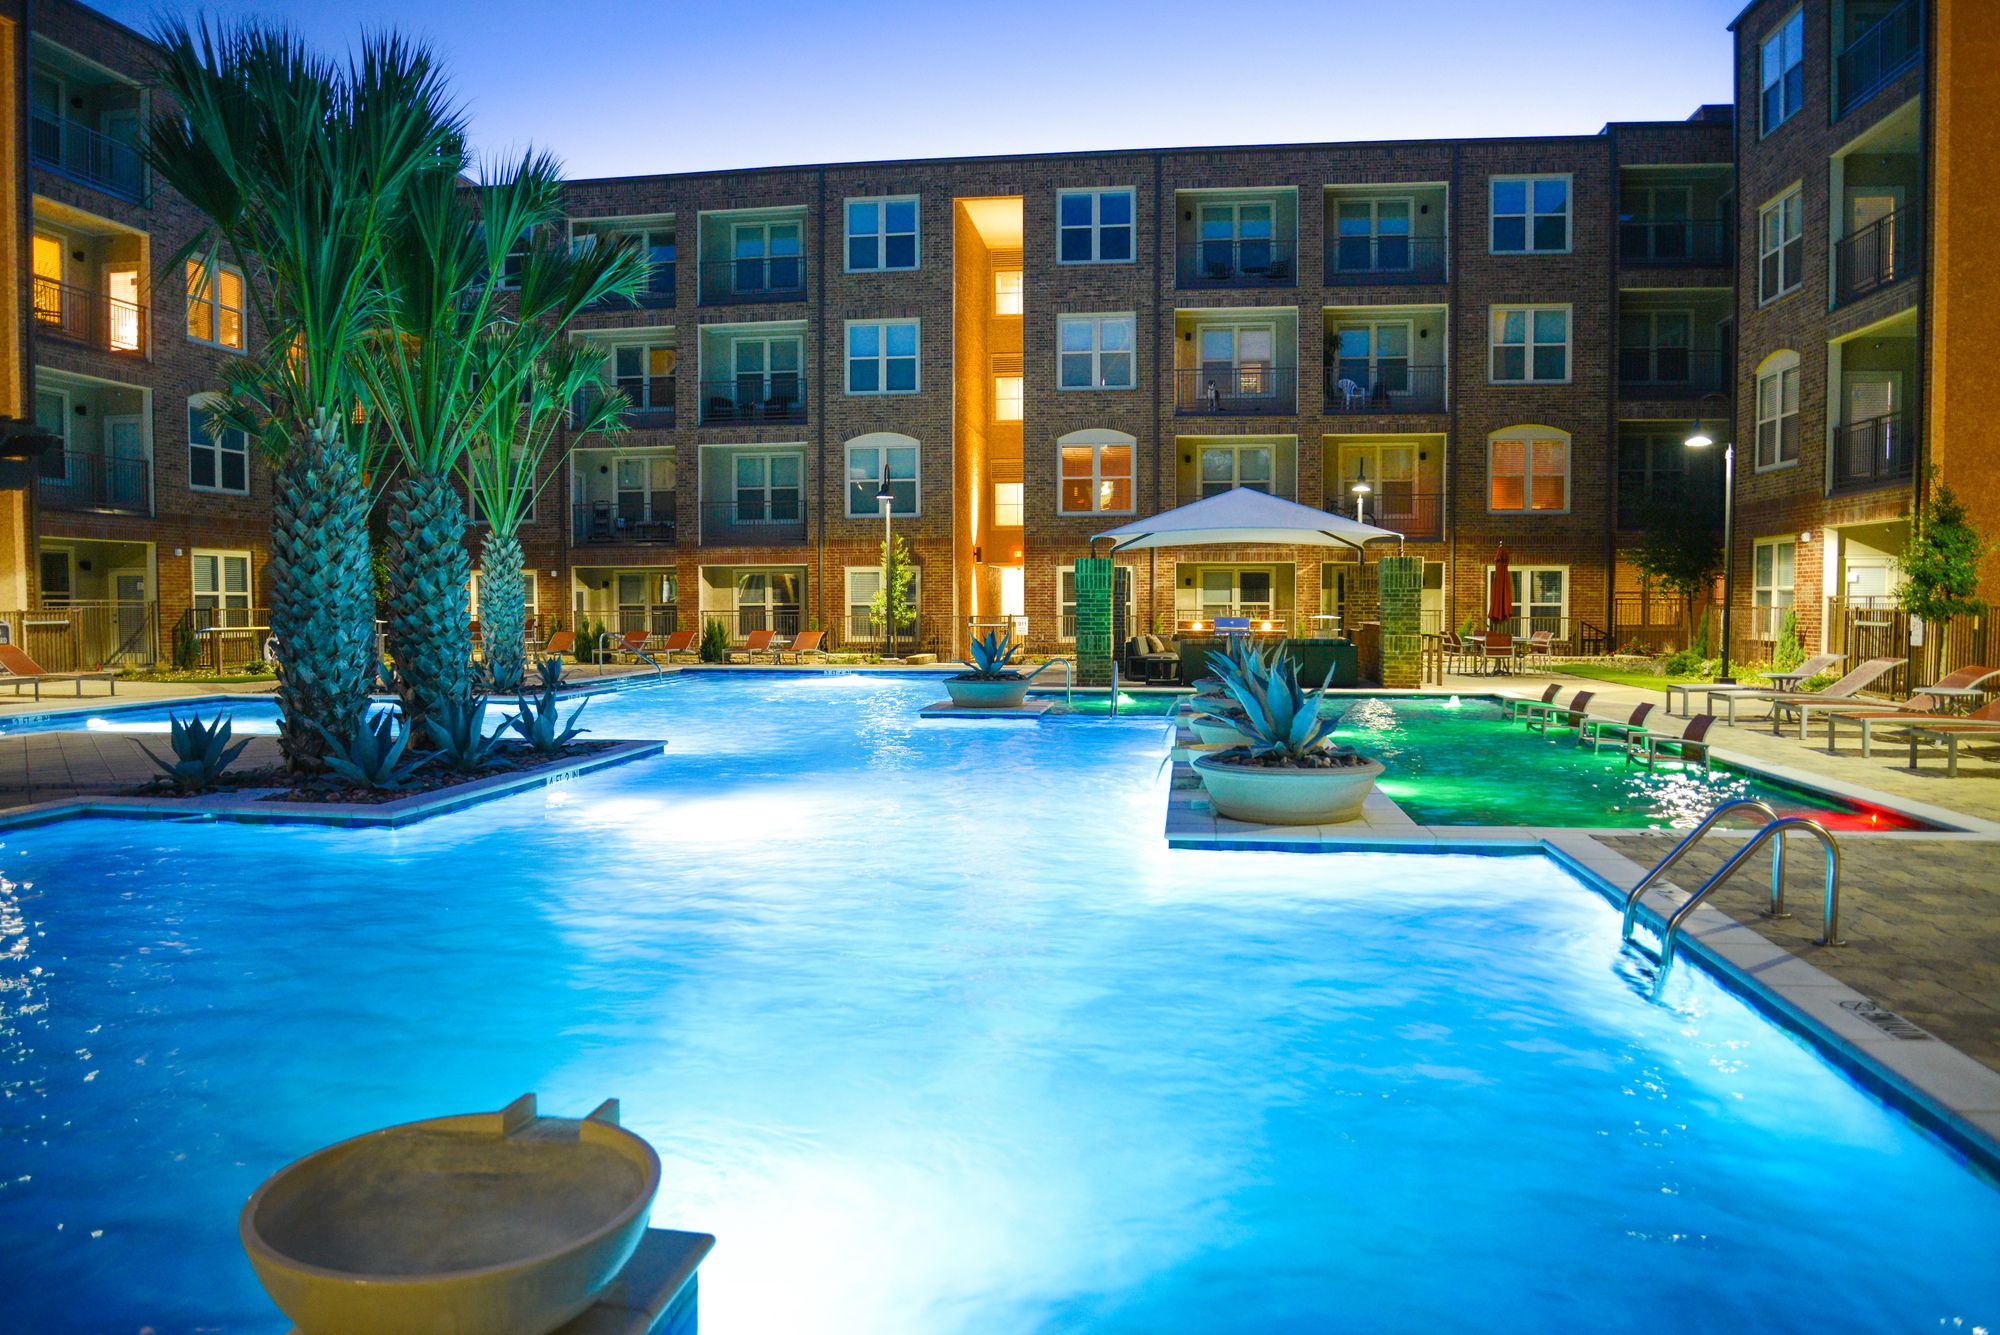 Resort-style pool with colorful accent lighting and palm trees